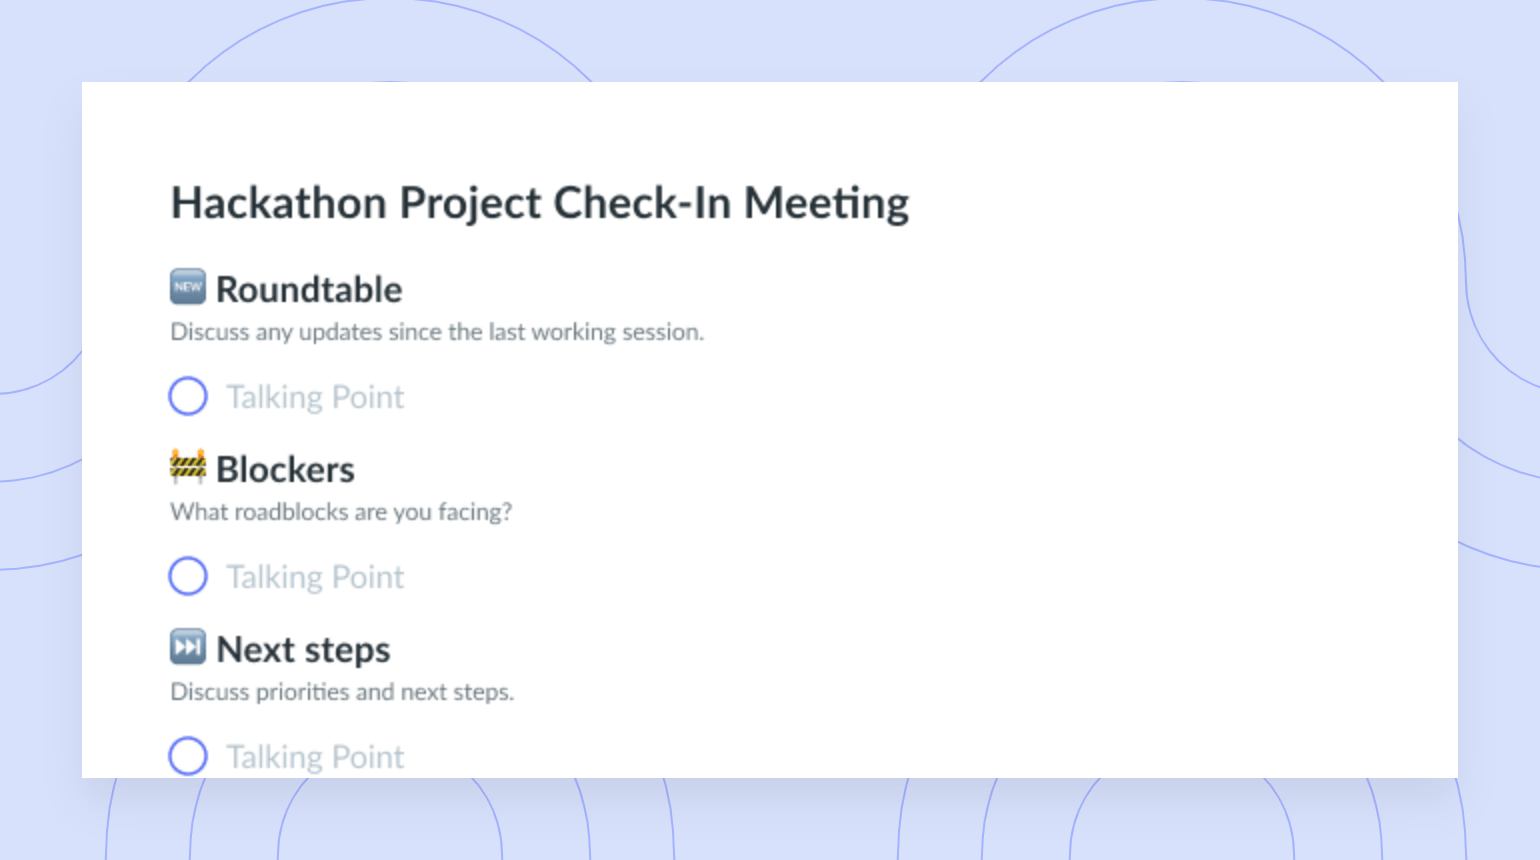 Hackathon Project Check-In Meeting Template